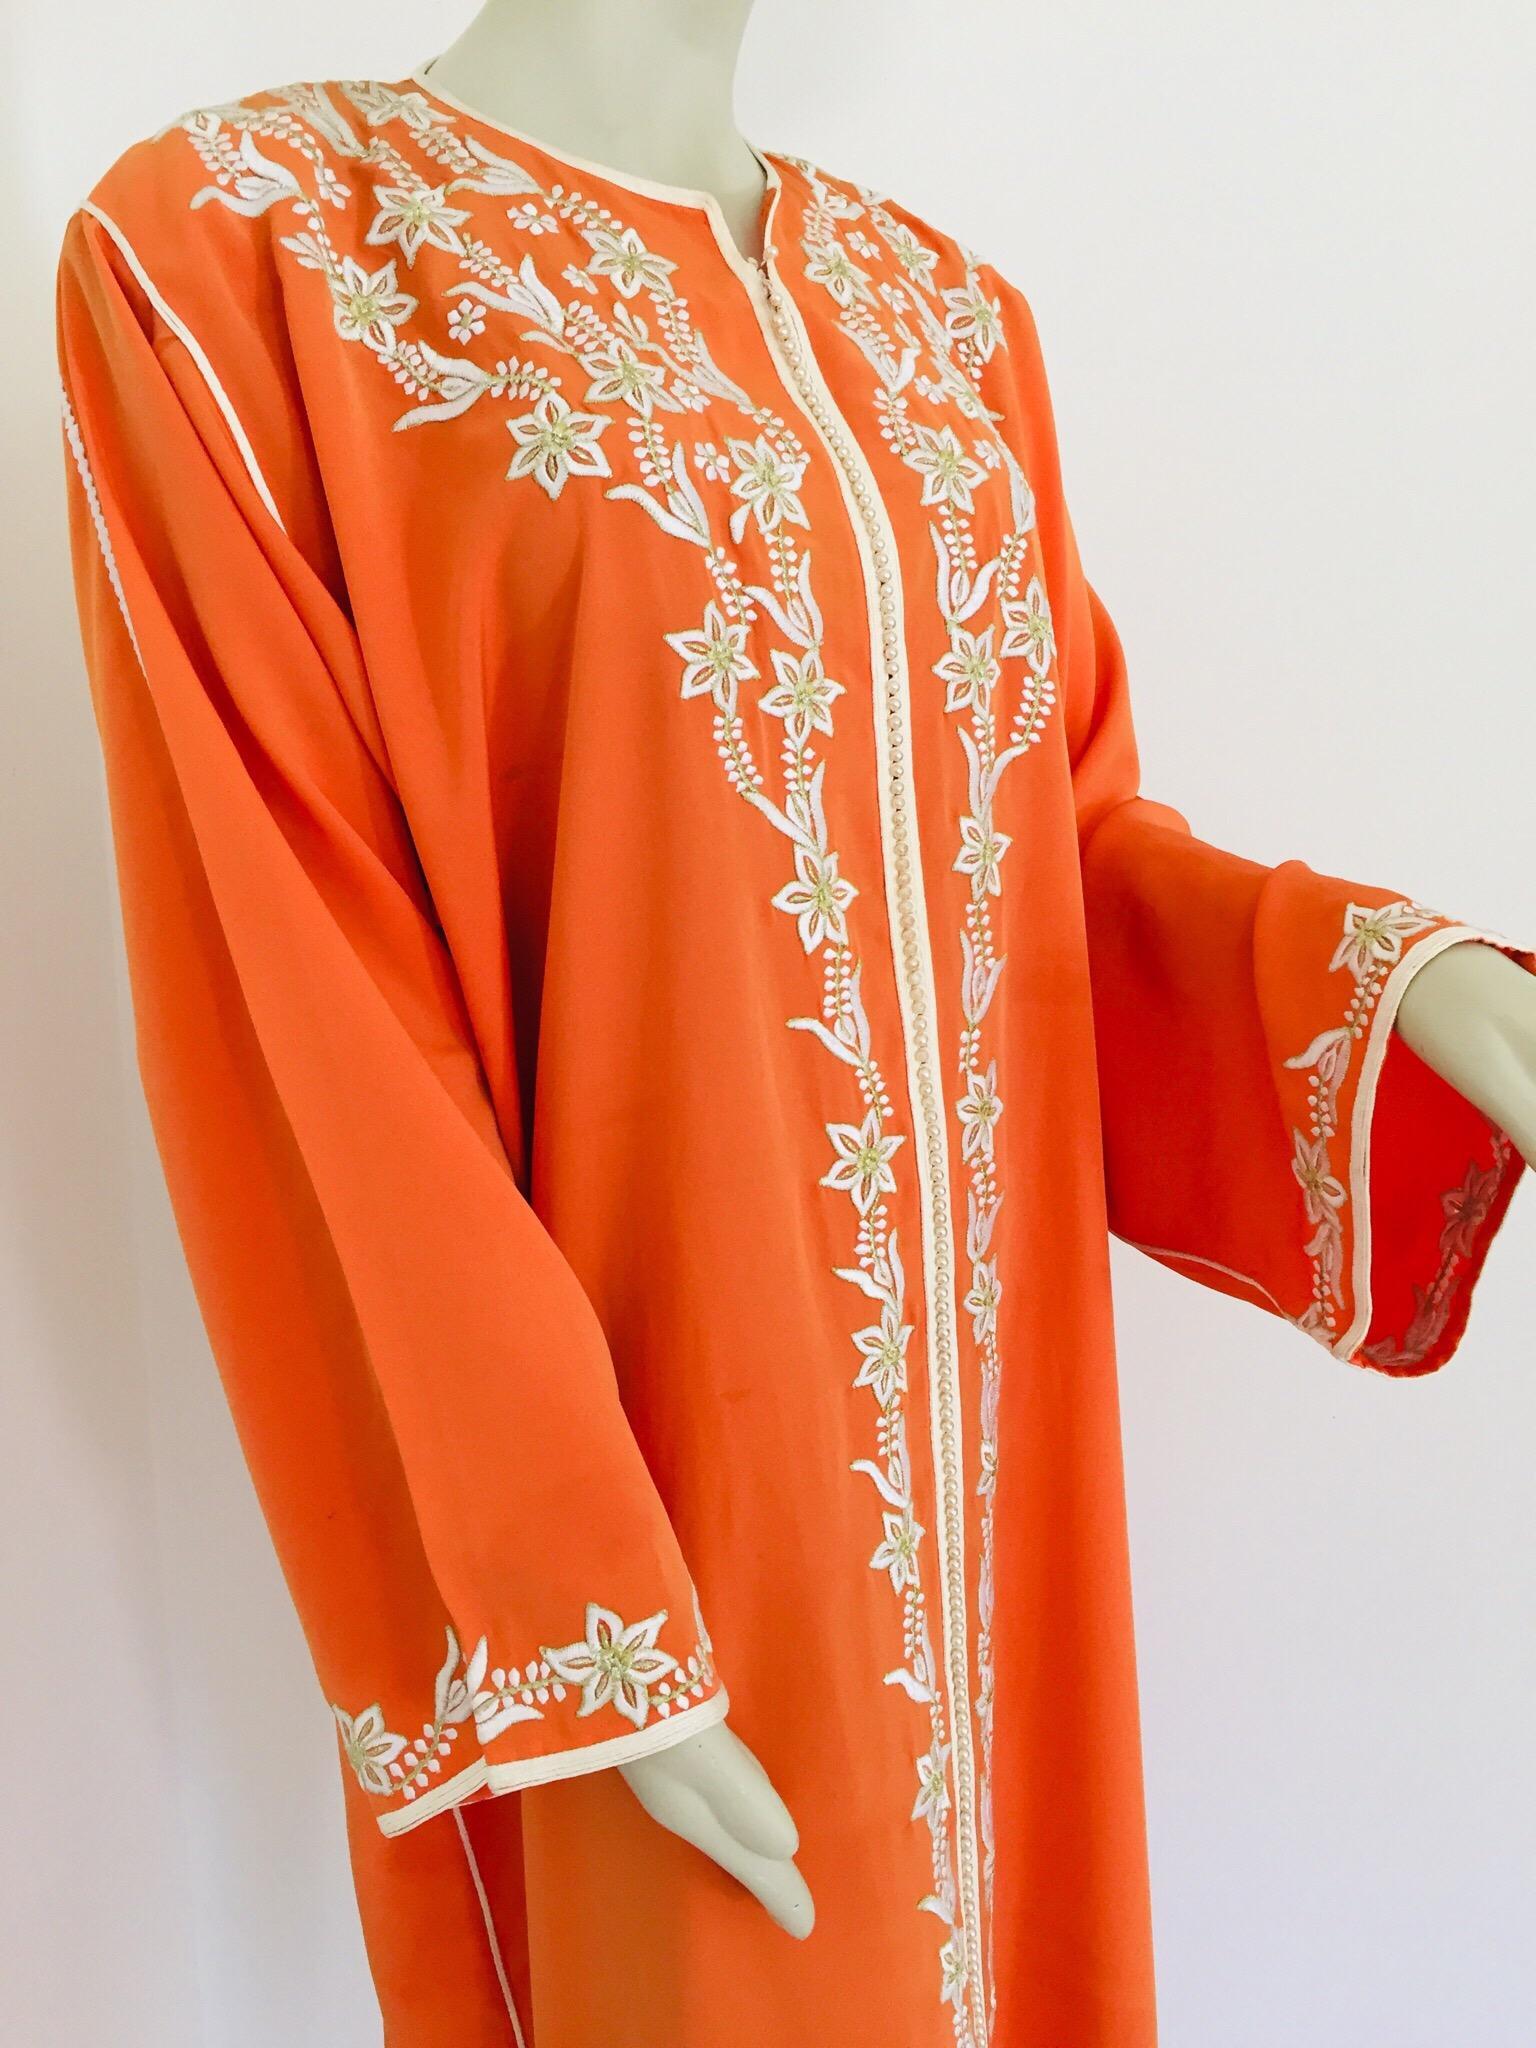 Elegant Moroccan caftan orange color embroidered with gold trim,
circa 1970s.
This long maxi dress kaftan trim is embroidered and embellished with pearls entirely by hand.
One of a kind evening Moroccan Middle Eastern gown.
The kaftan features a